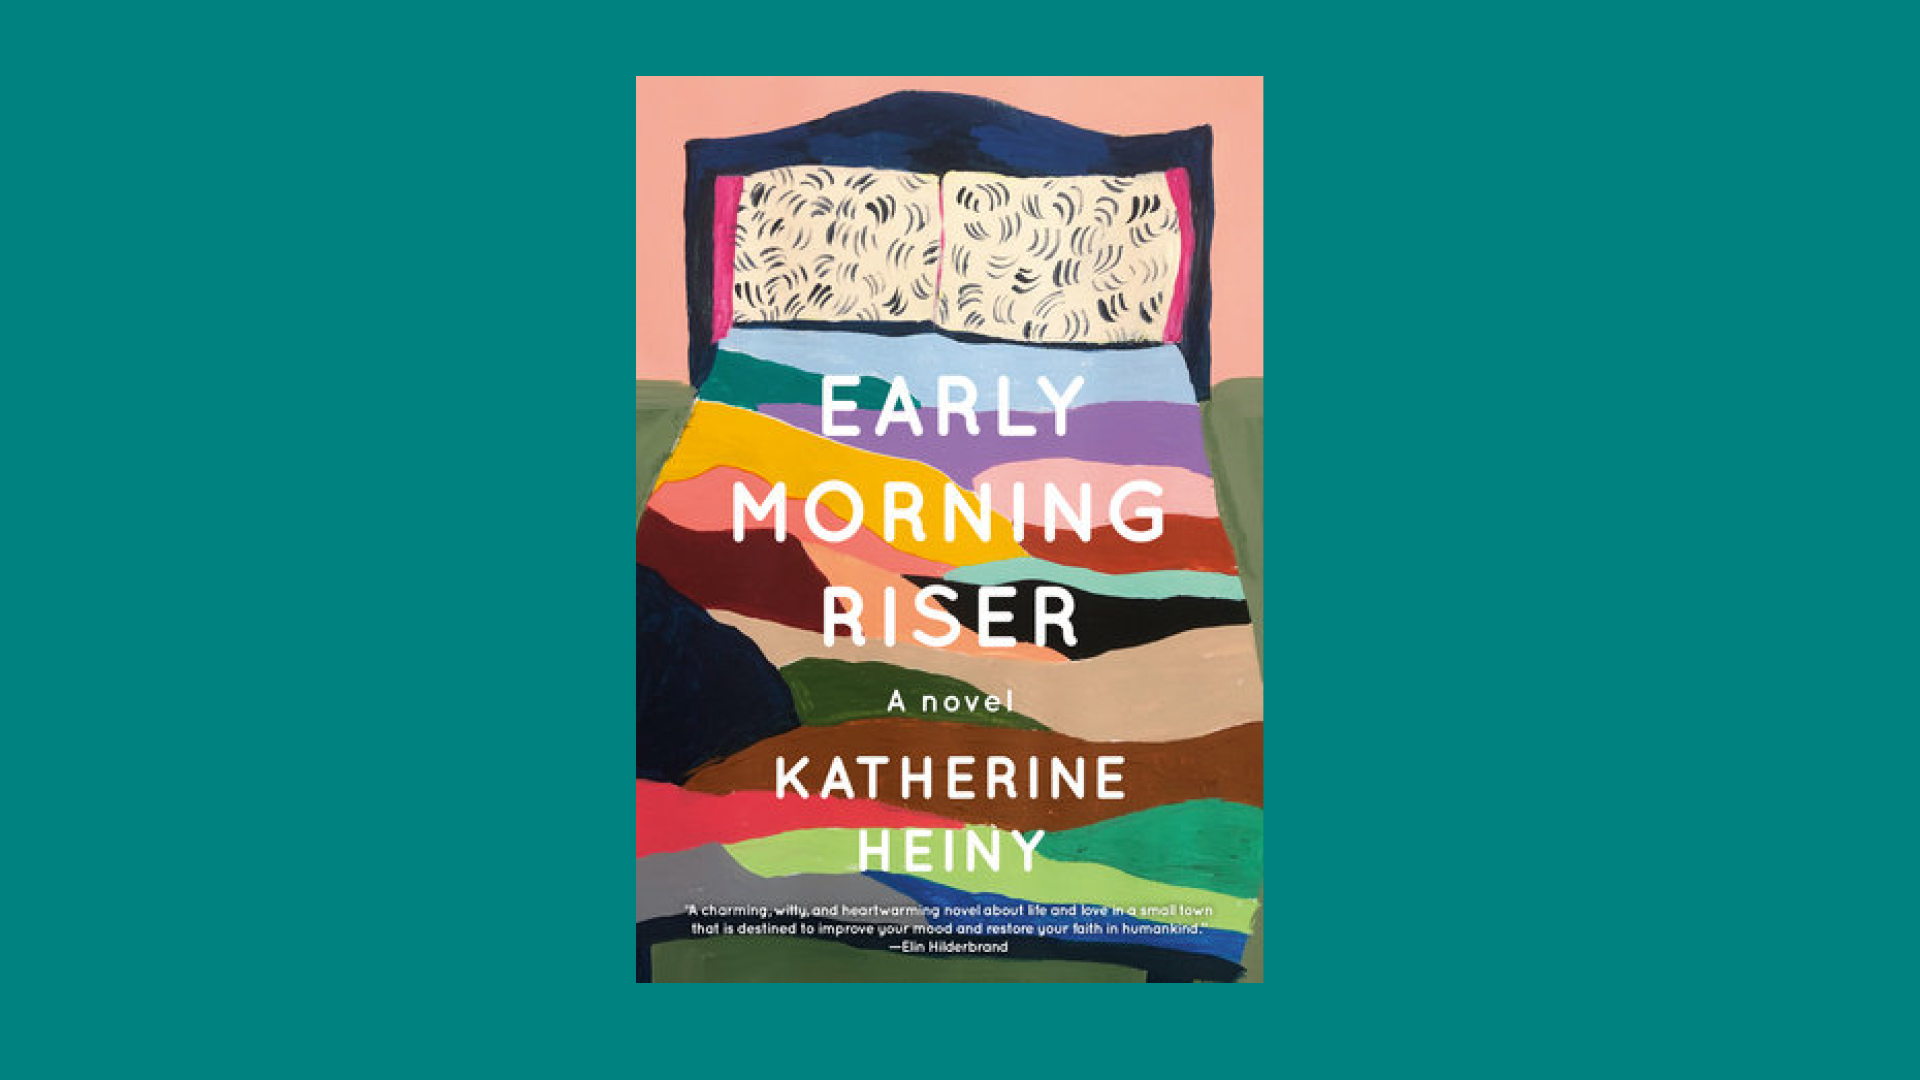 “Early Morning Riser” by Katherine Heiny